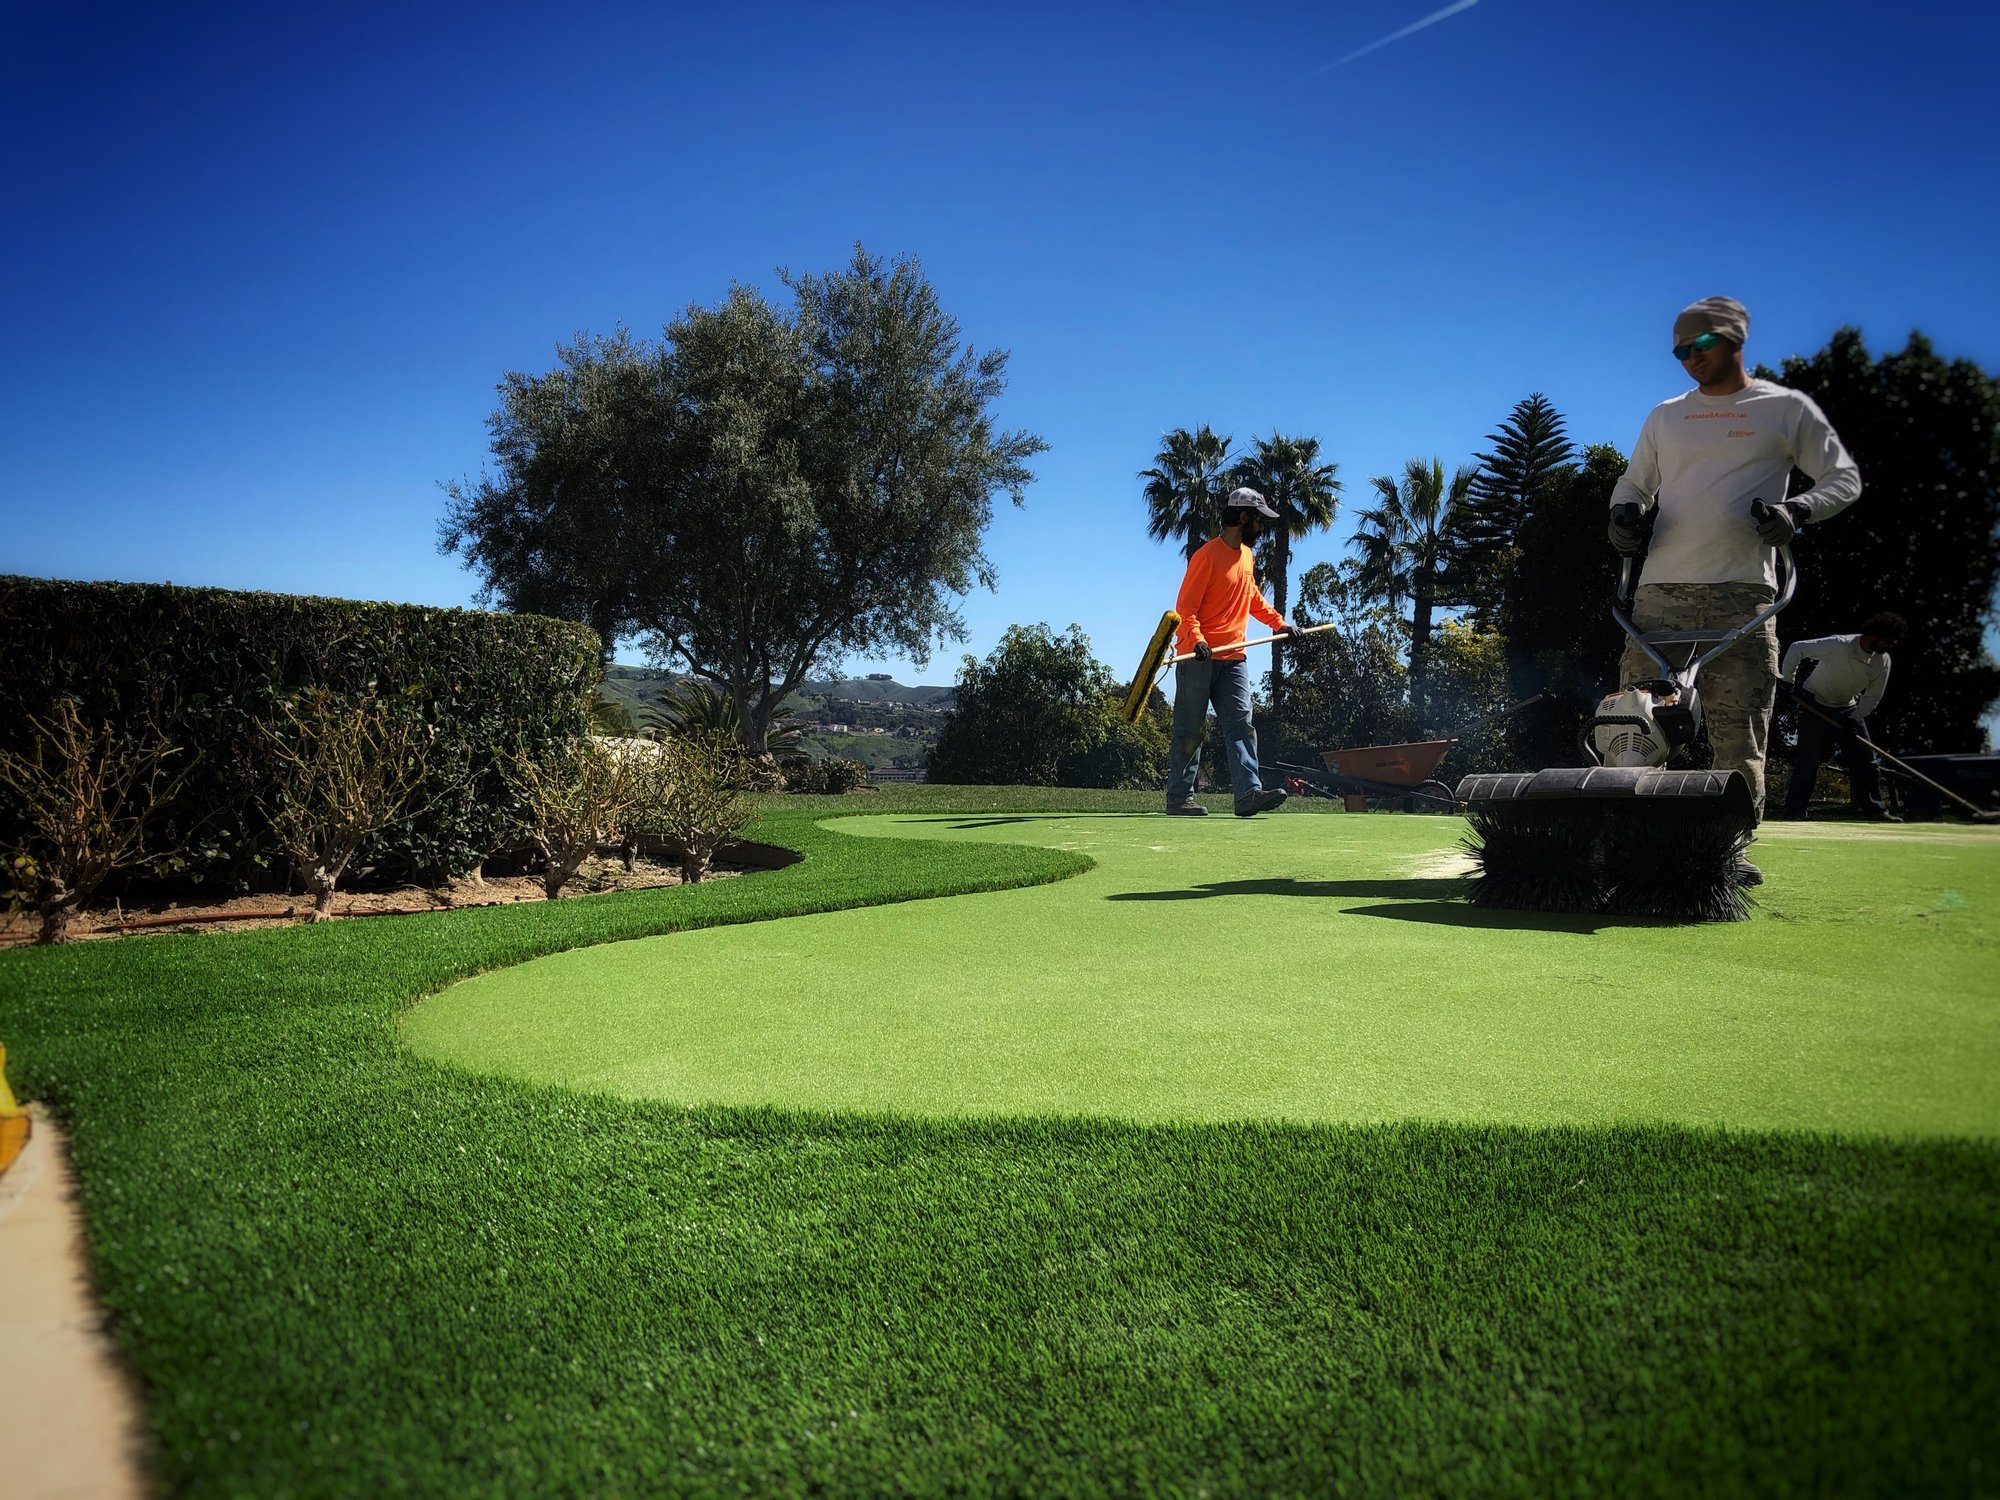 putting green installation in process